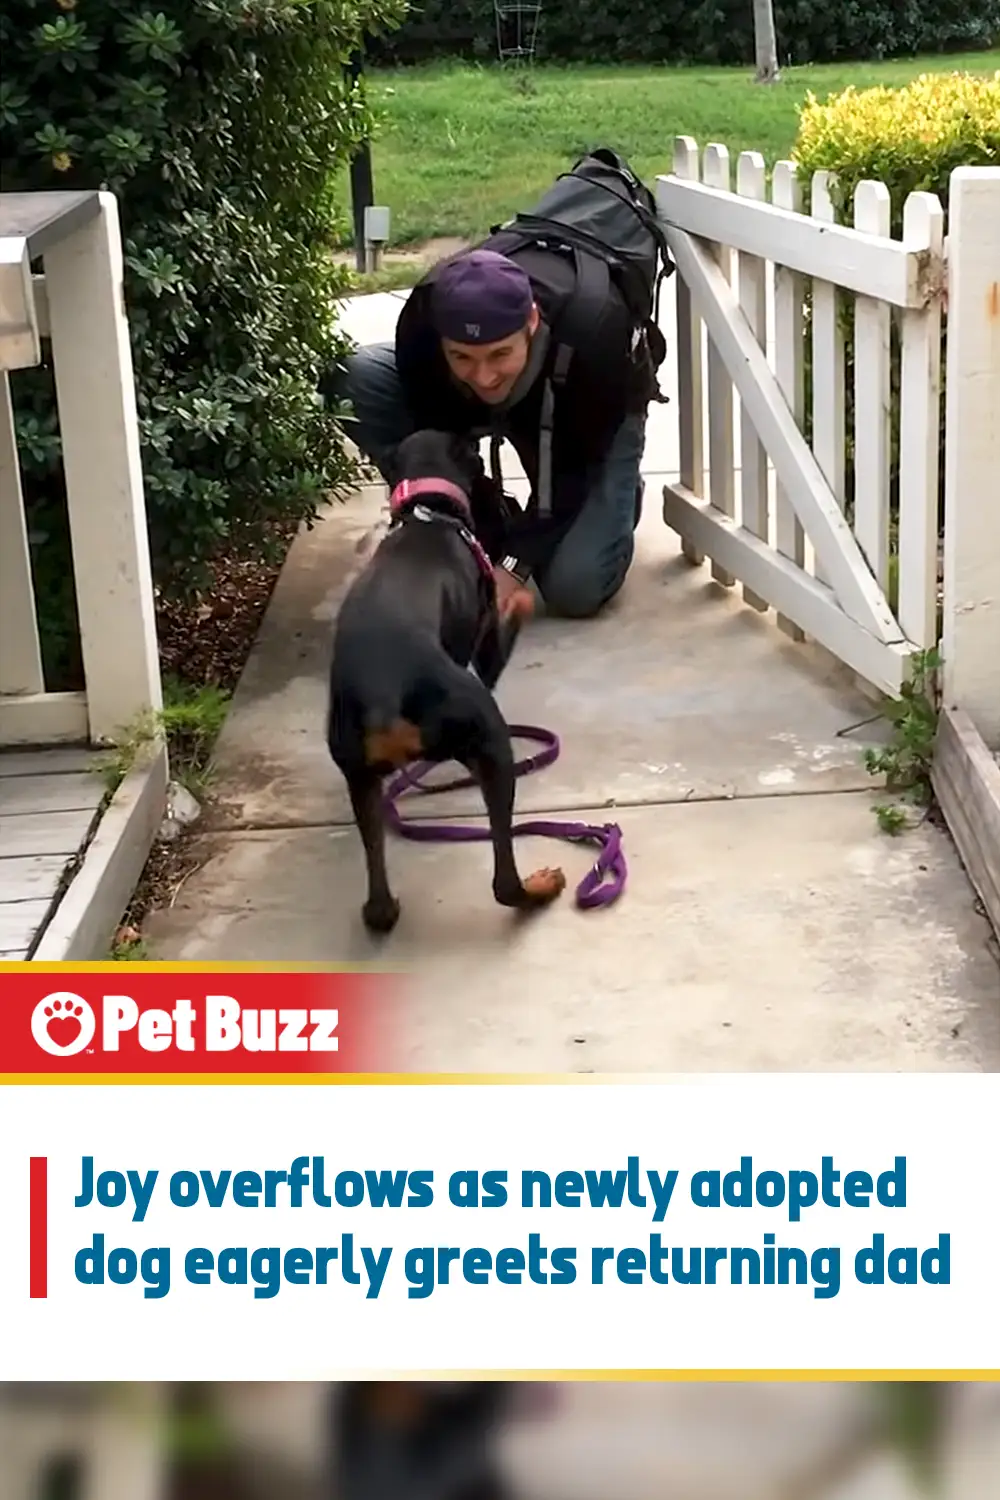 Joy overflows as newly adopted dog eagerly greets returning dad